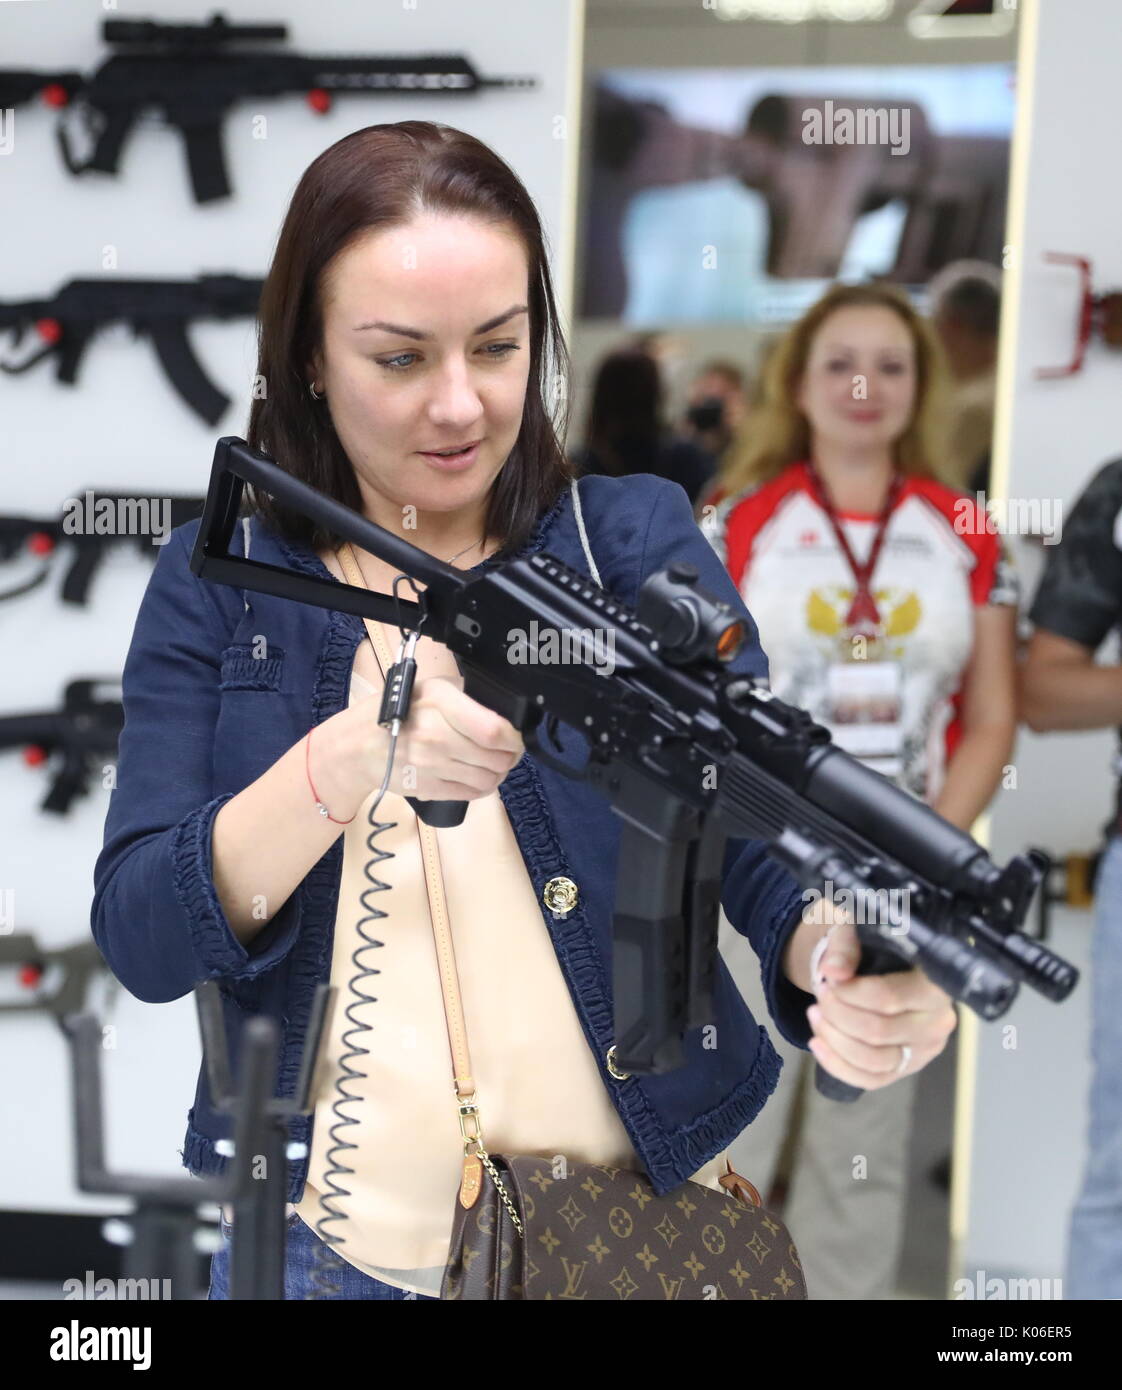 Moscow Region Russia August 21 17 A Visitor Aims A Kalashnikov Stock Photo Alamy